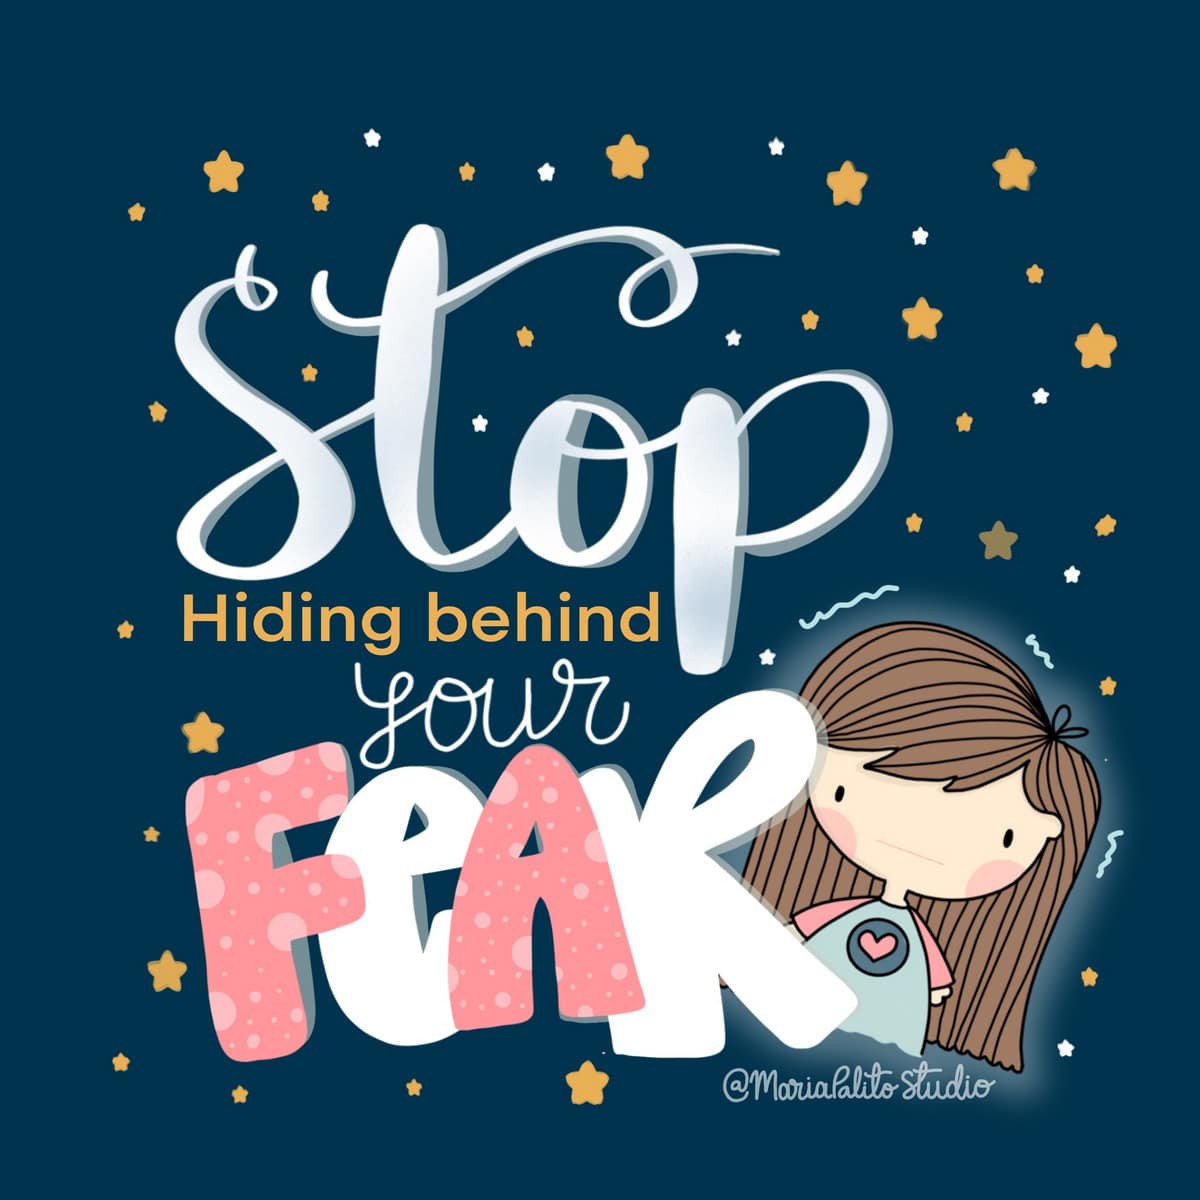 Stop hiding behind your fear by Mariapalitostudio